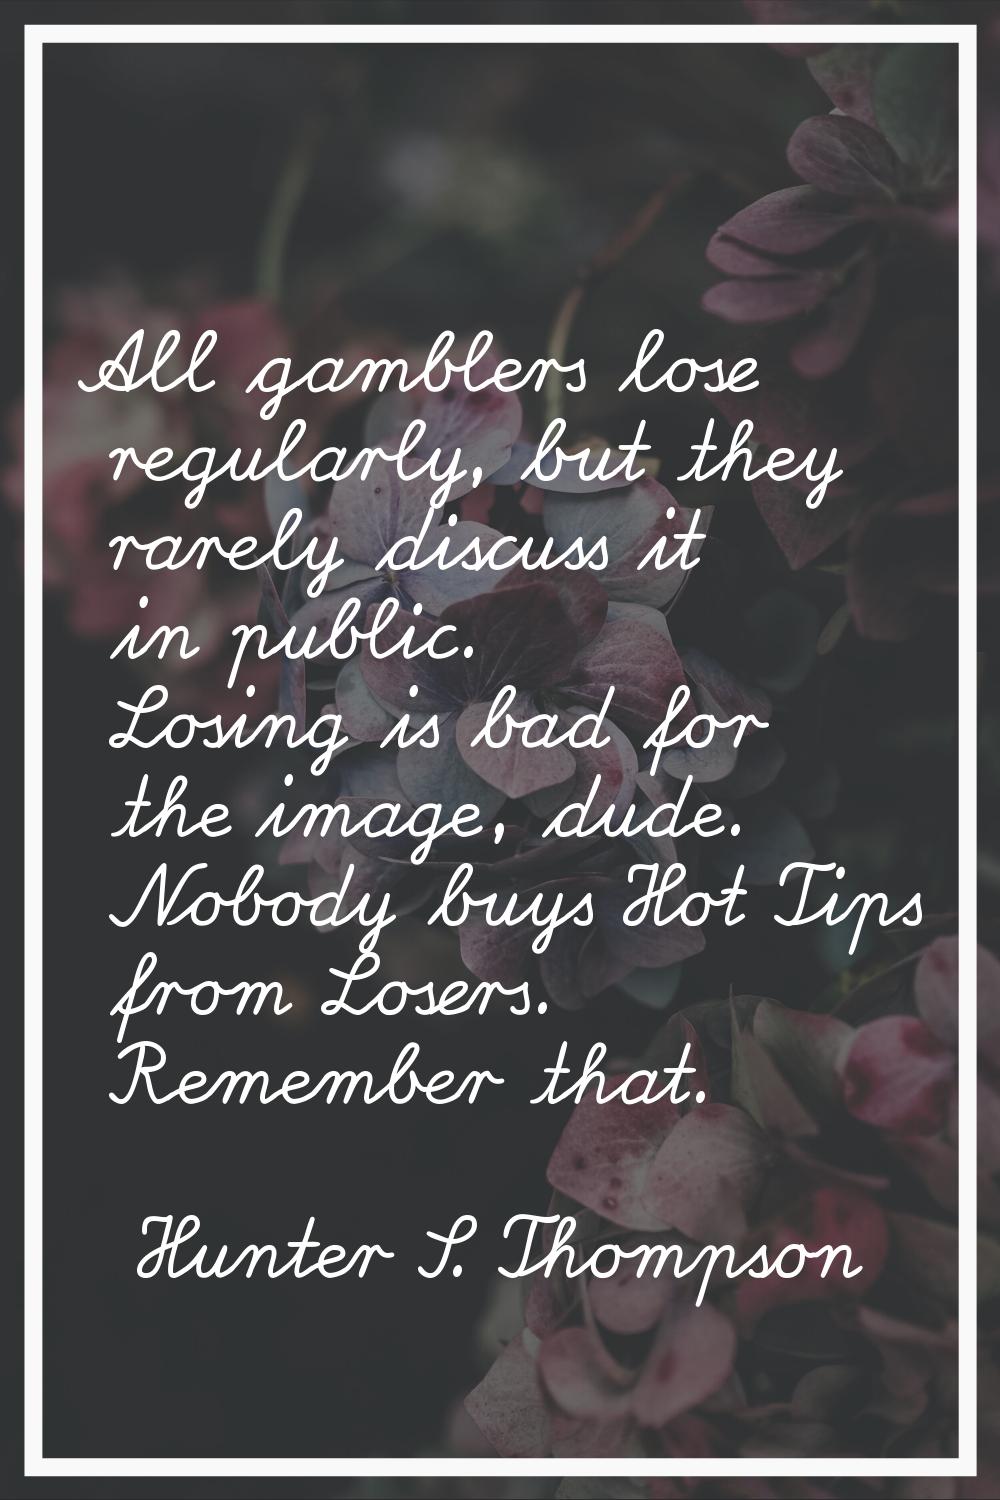 All gamblers lose regularly, but they rarely discuss it in public. Losing is bad for the image, dud